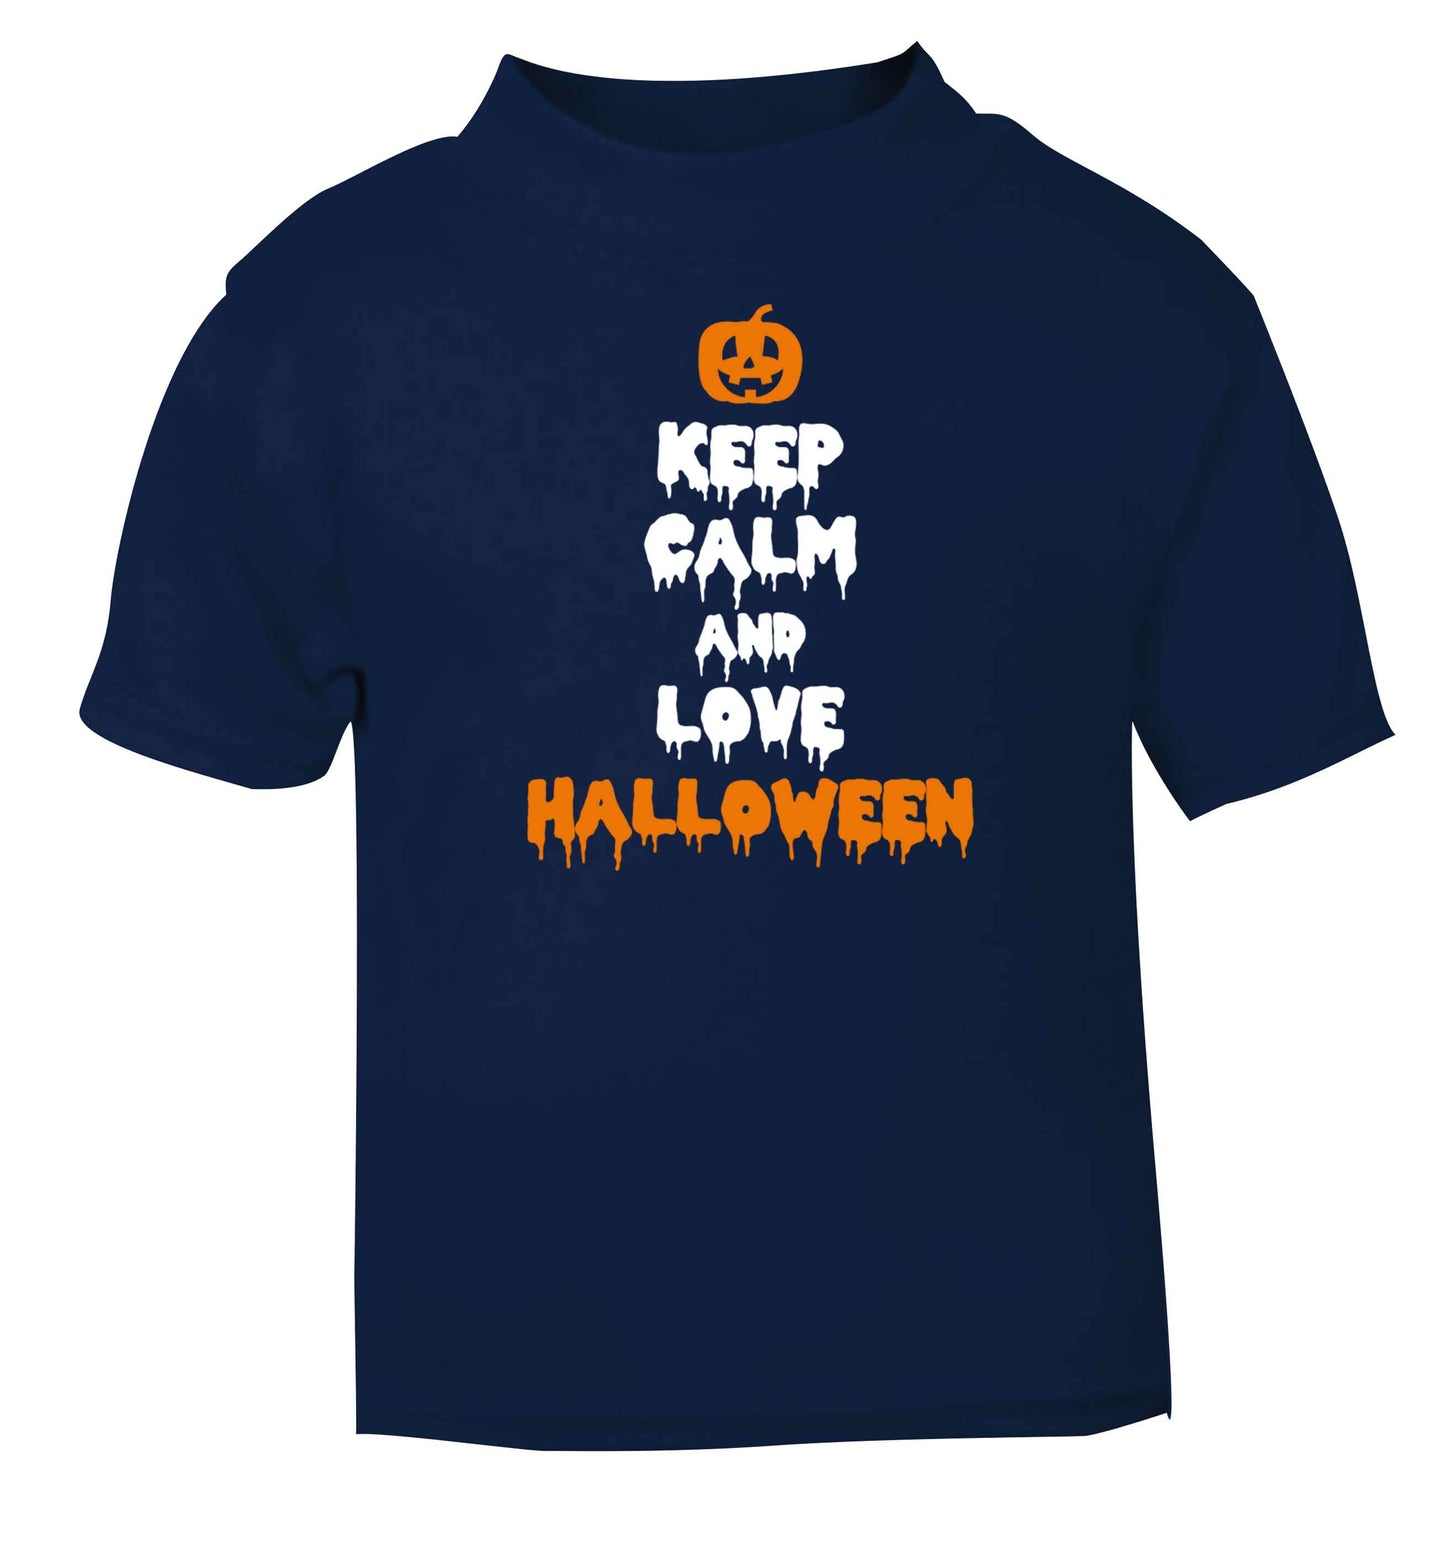 Keep calm and love halloween navy baby toddler Tshirt 2 Years